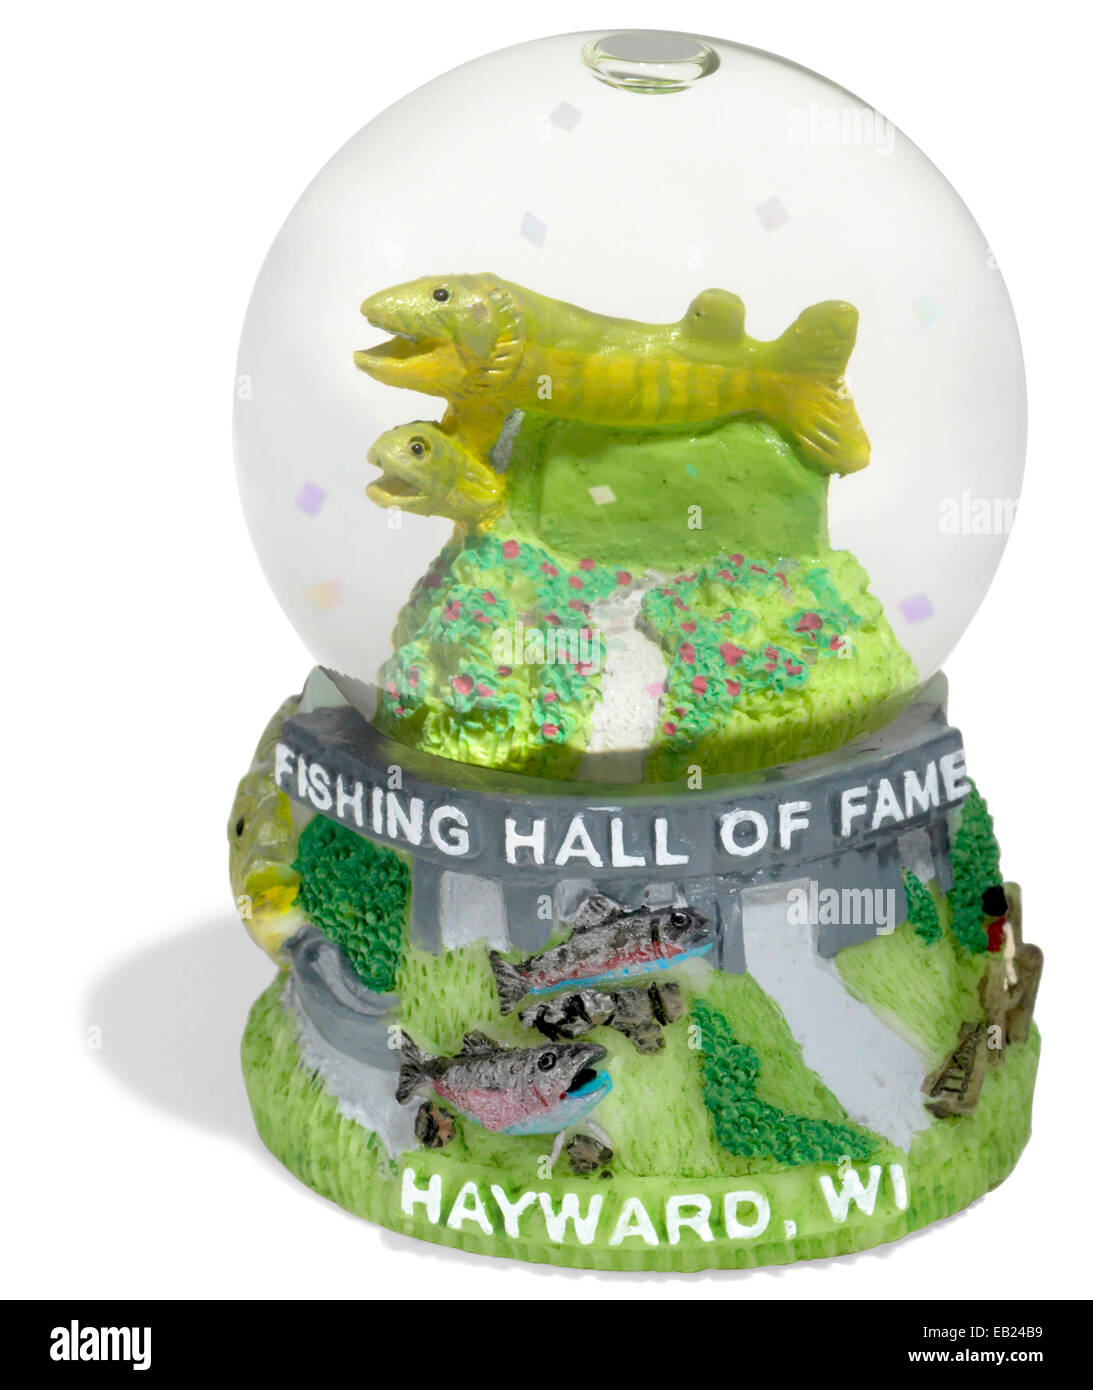 fish snow globe from the fishing hall of fame Stock Photo - Alamy